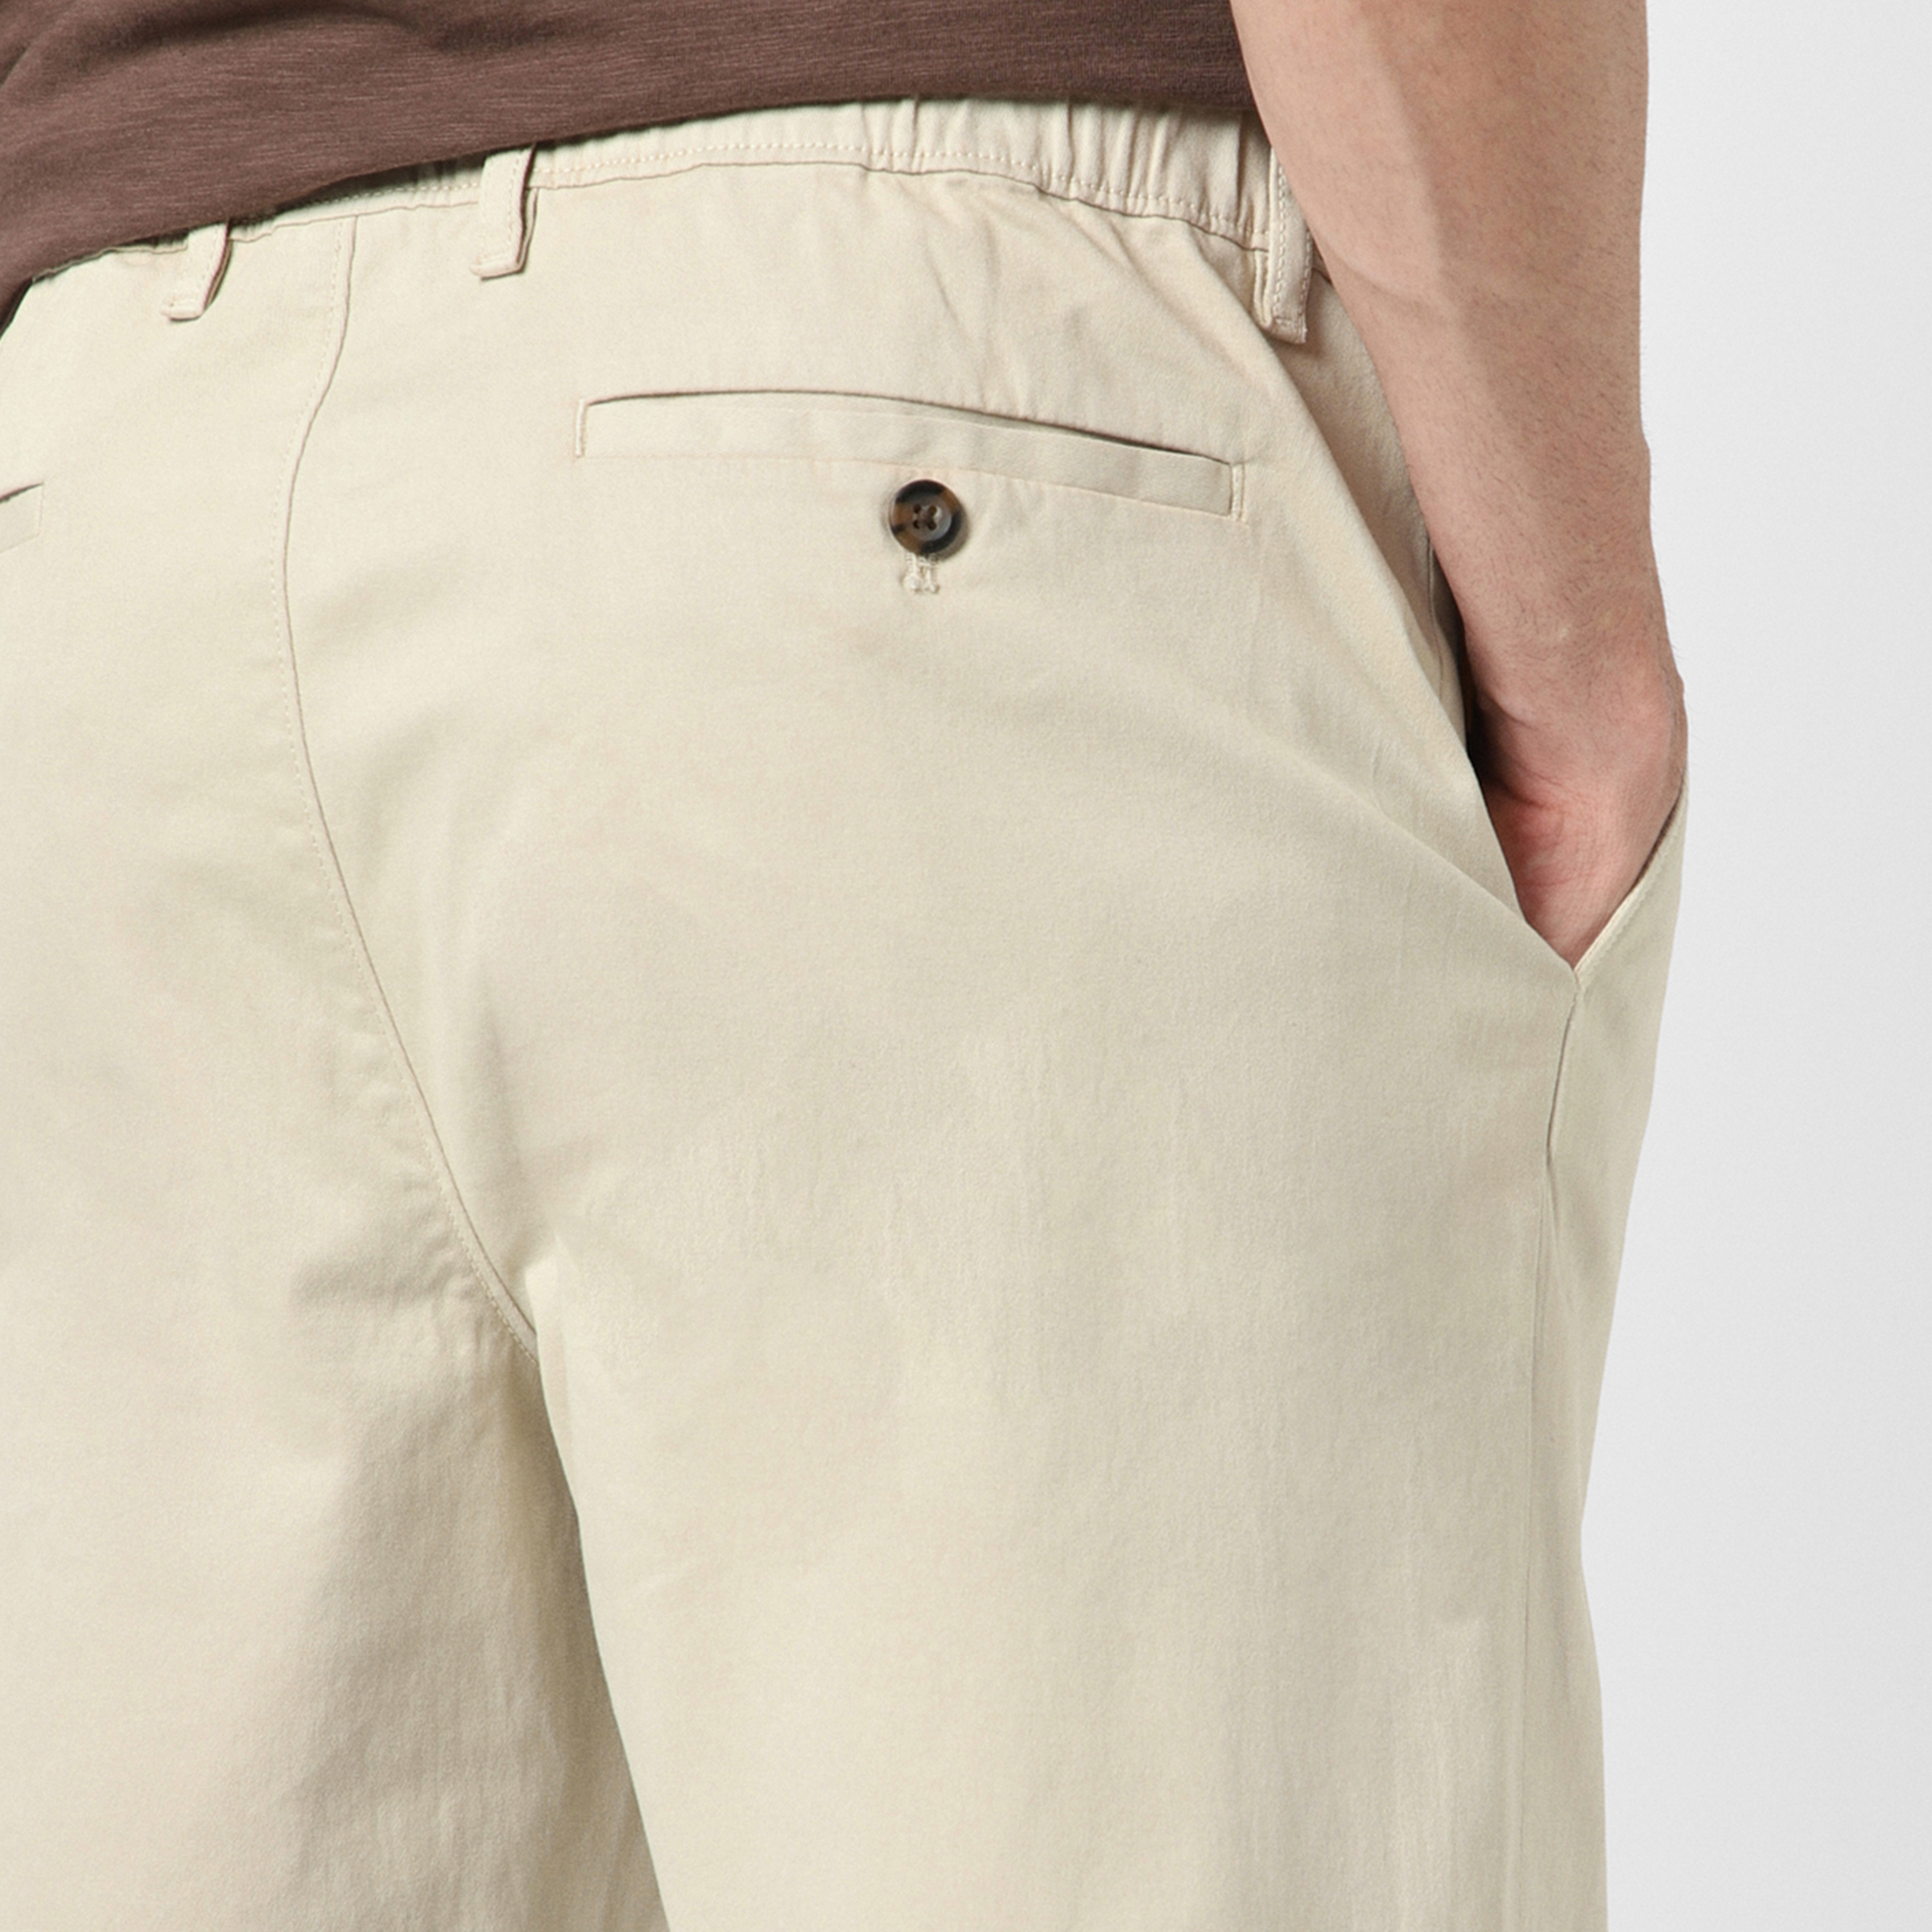 Relaxed Stretch Chino Pant Stone close up back right pocket on model